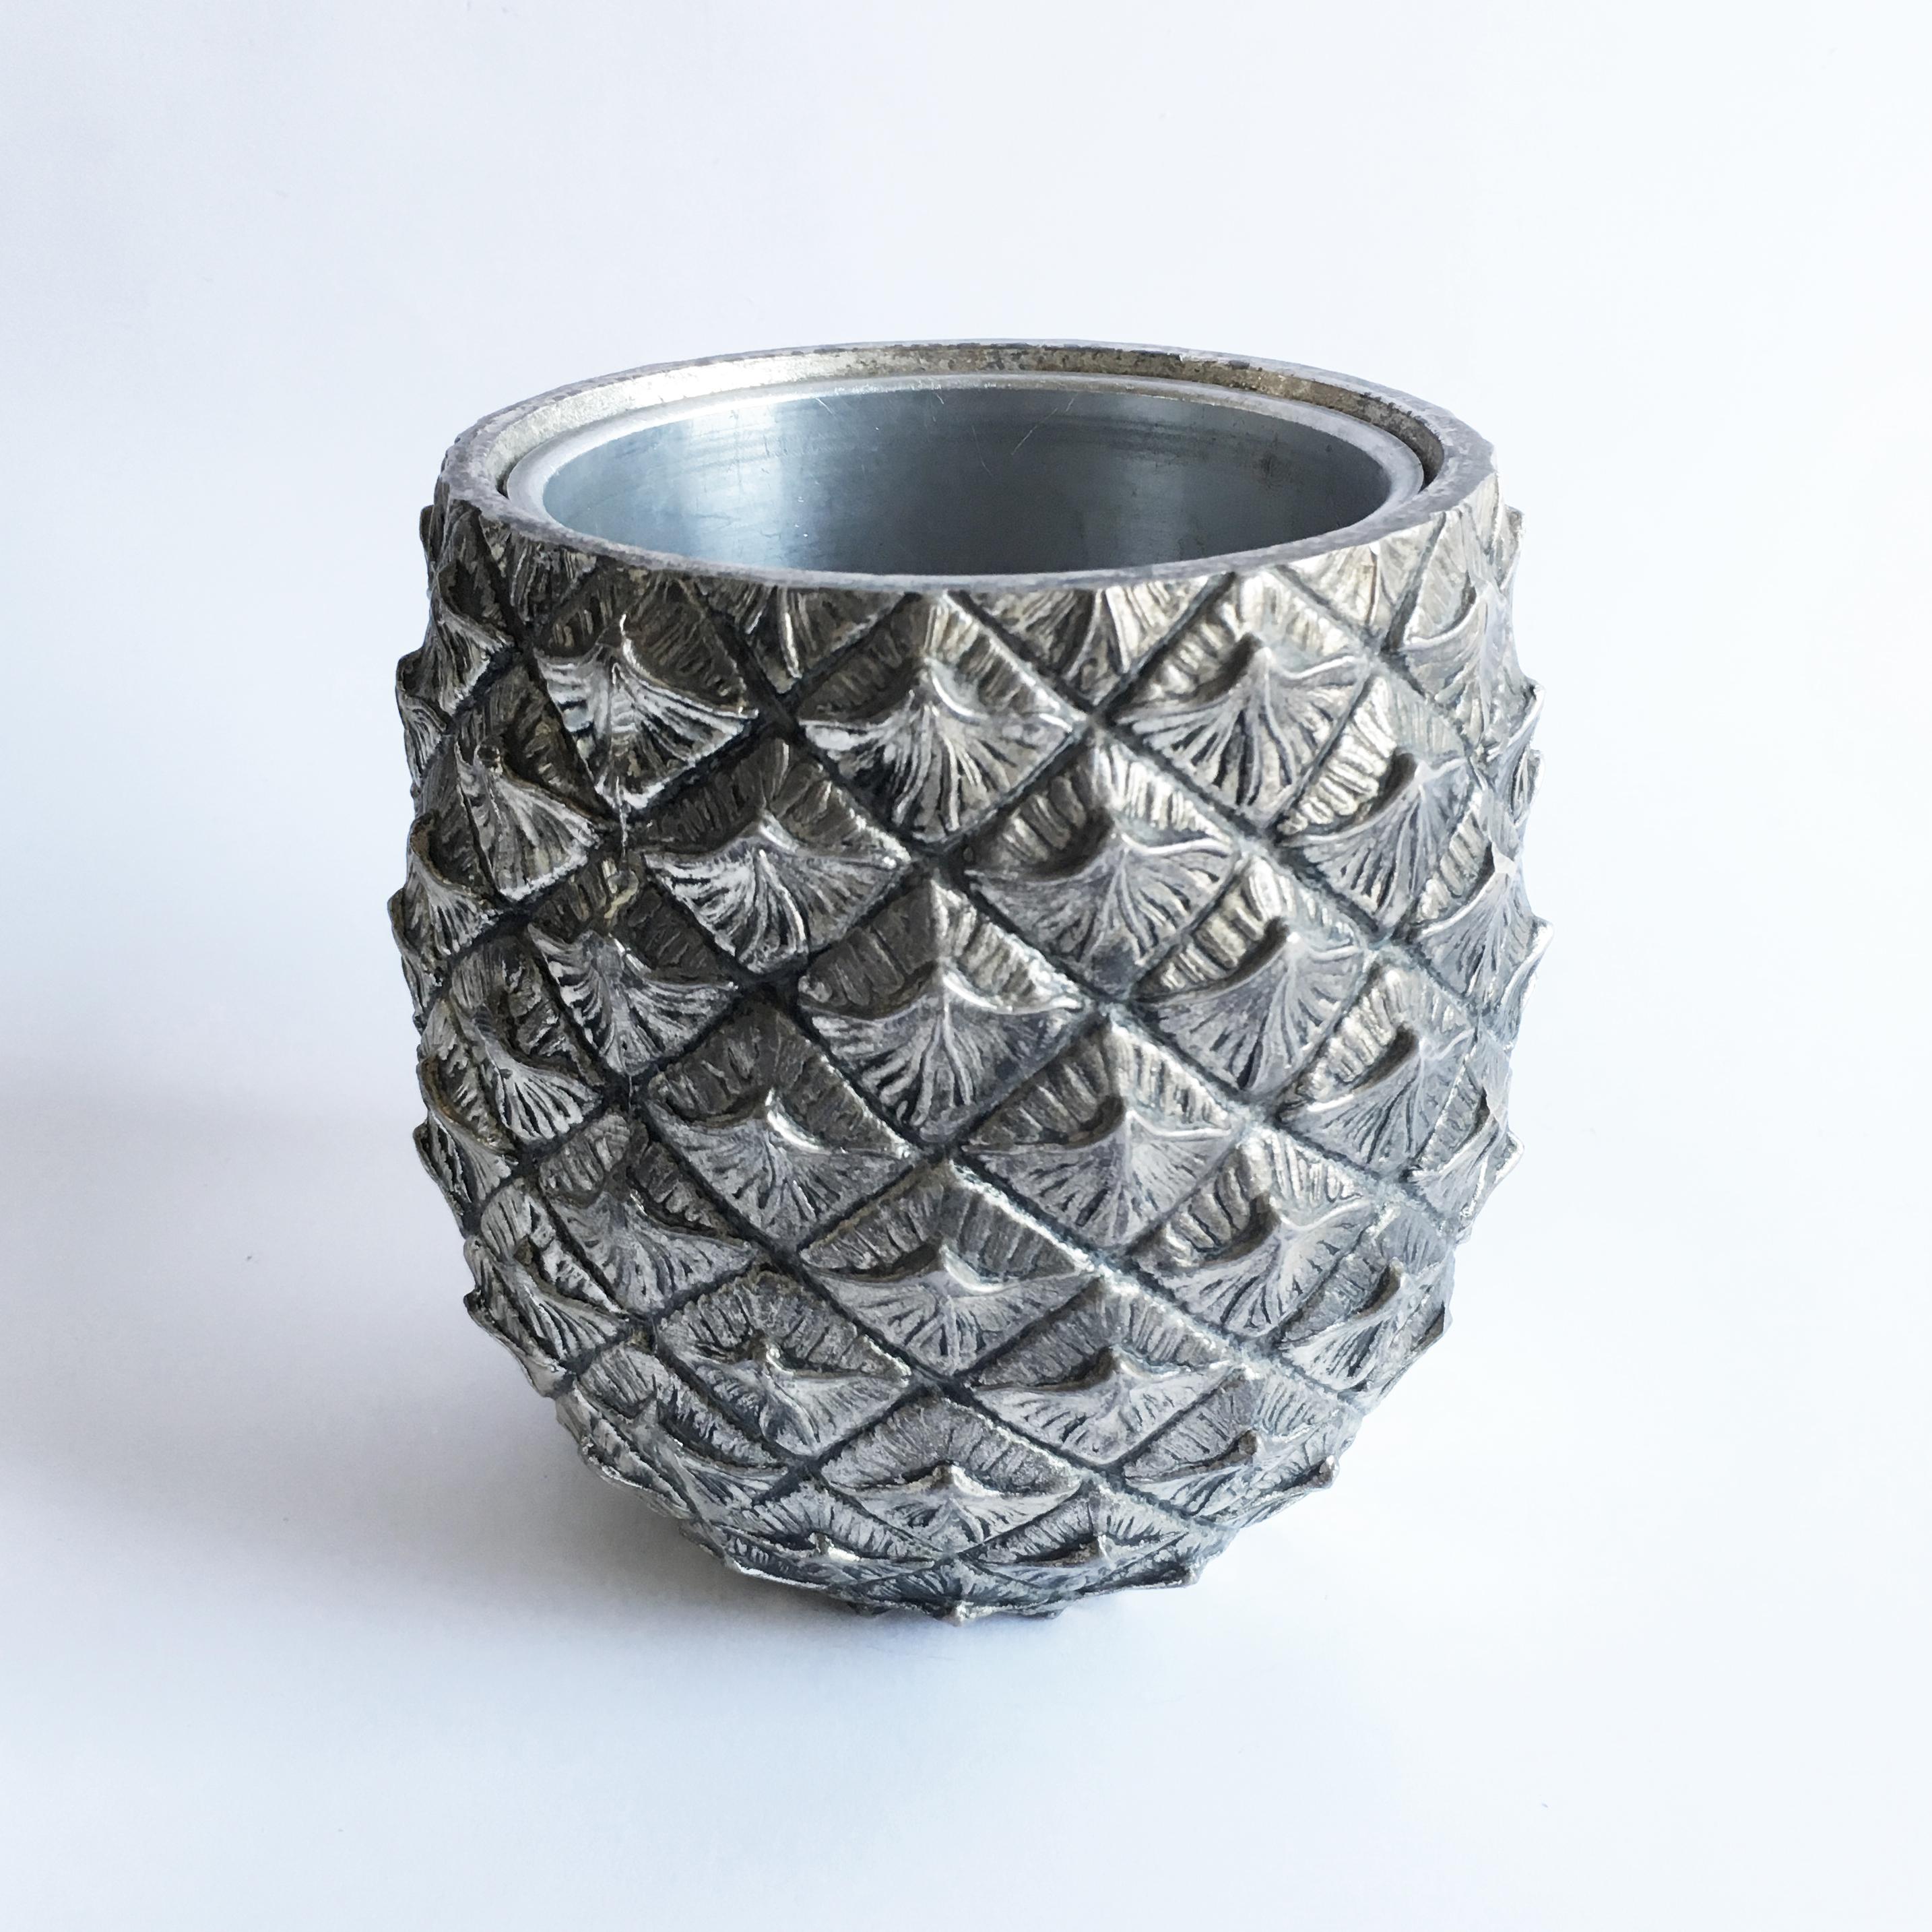 Mid-20th Century Italian Design Pineapple Ice Bucket in Pewter by Mauro Manetti For Sale 2